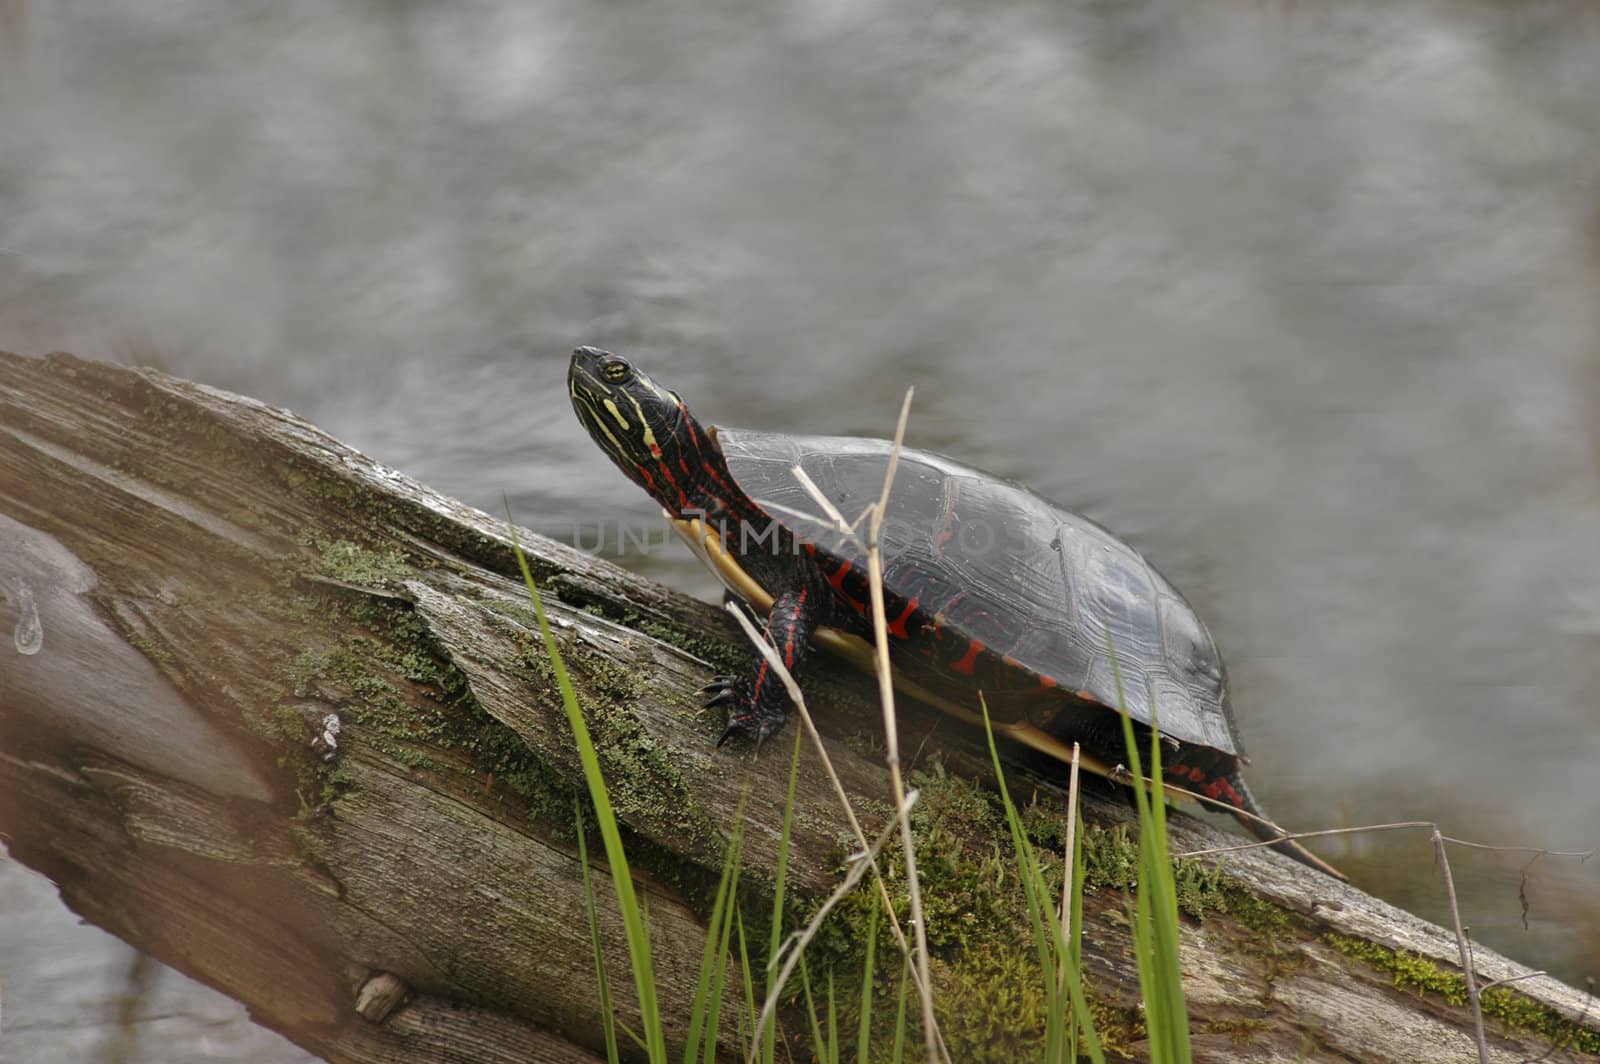  Painted Turtle by photopierre